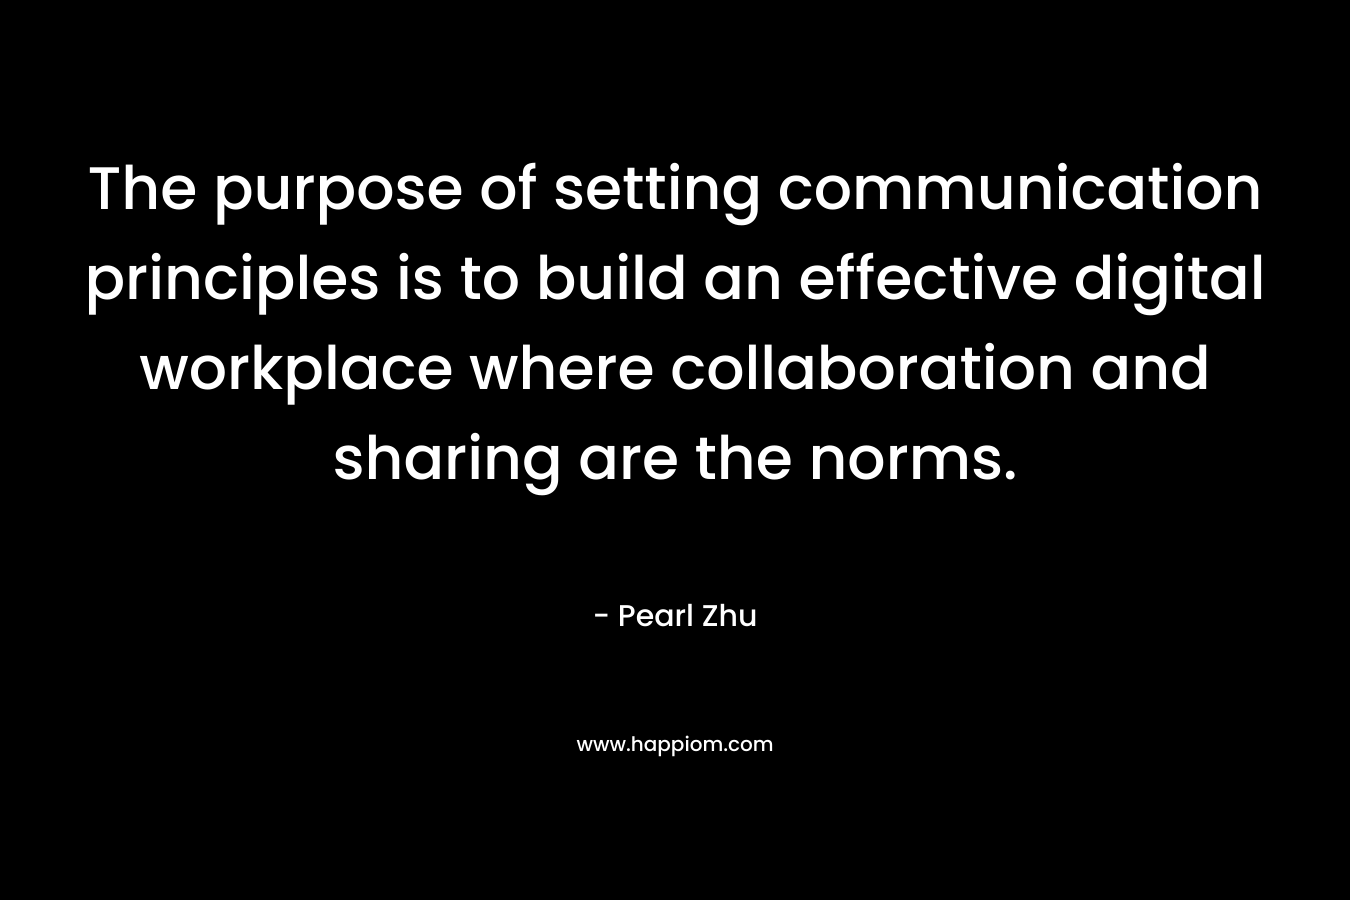 The purpose of setting communication principles is to build an effective digital workplace where collaboration and sharing are the norms. – Pearl Zhu